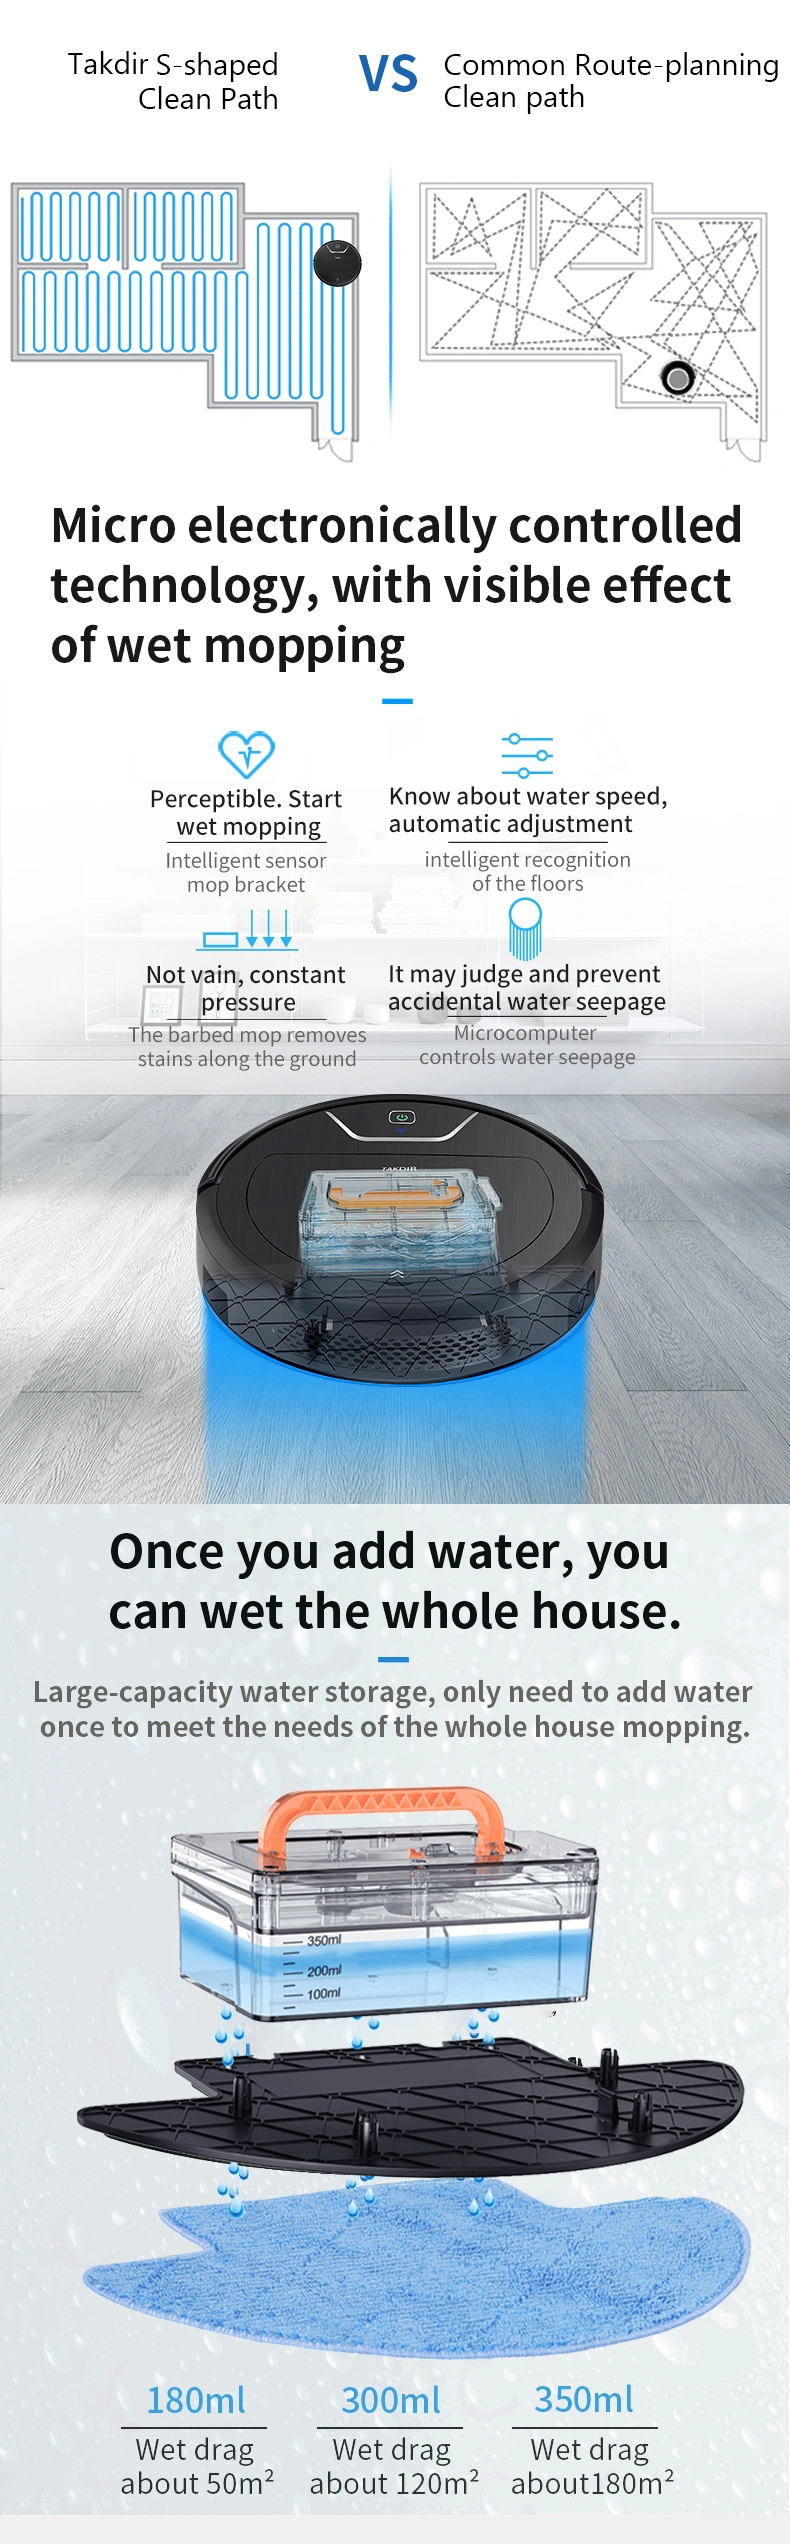 Automatic Robot Vacuum Cleaner - Lithium Battery 120 Min Run Time - Robotic Auto Home Cleaning for Clean Carpet and Hardwood Floor Dry Mopping